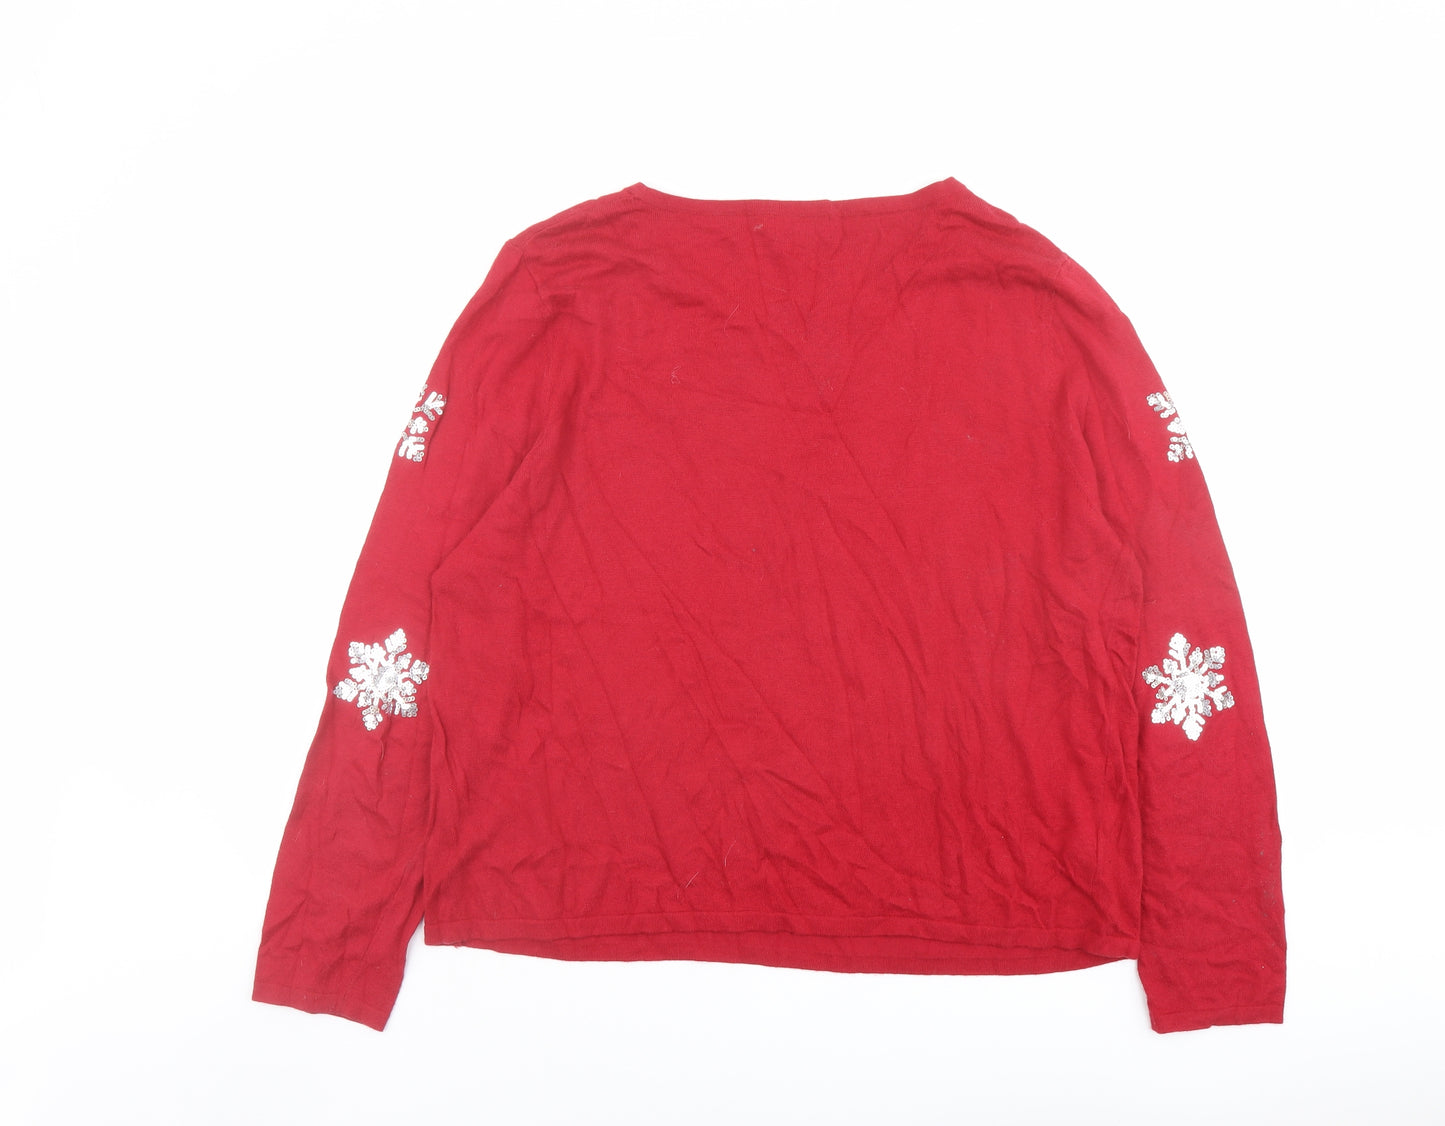 NEXT Womens Red Round Neck Geometric Cotton Pullover Jumper Size 18 - Snowflake